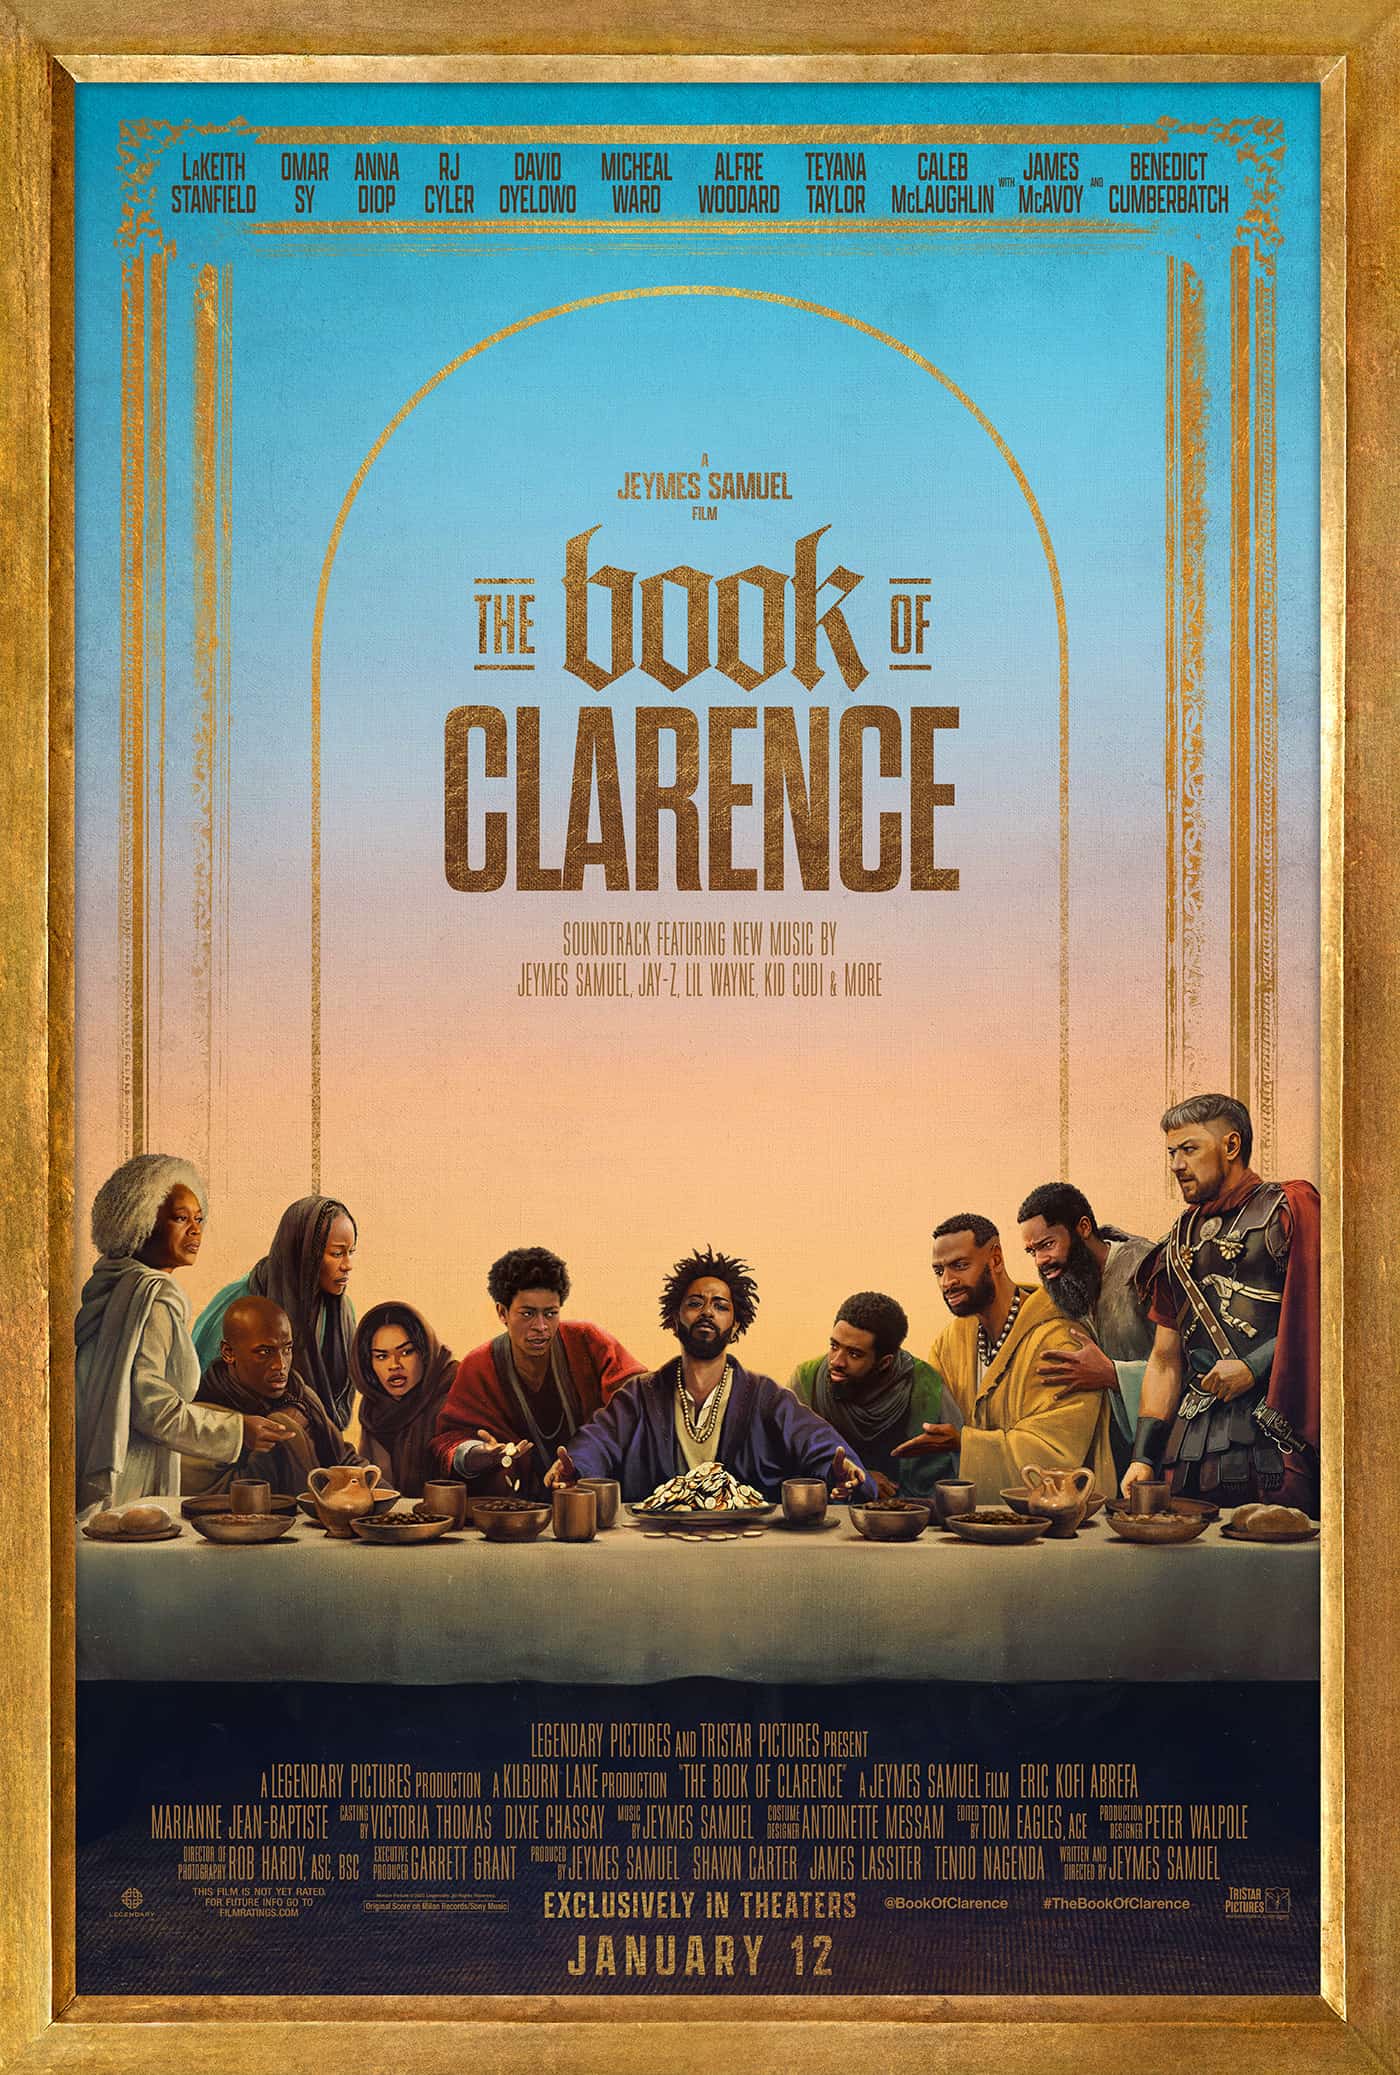 Movie Poster - The Book of Clarence